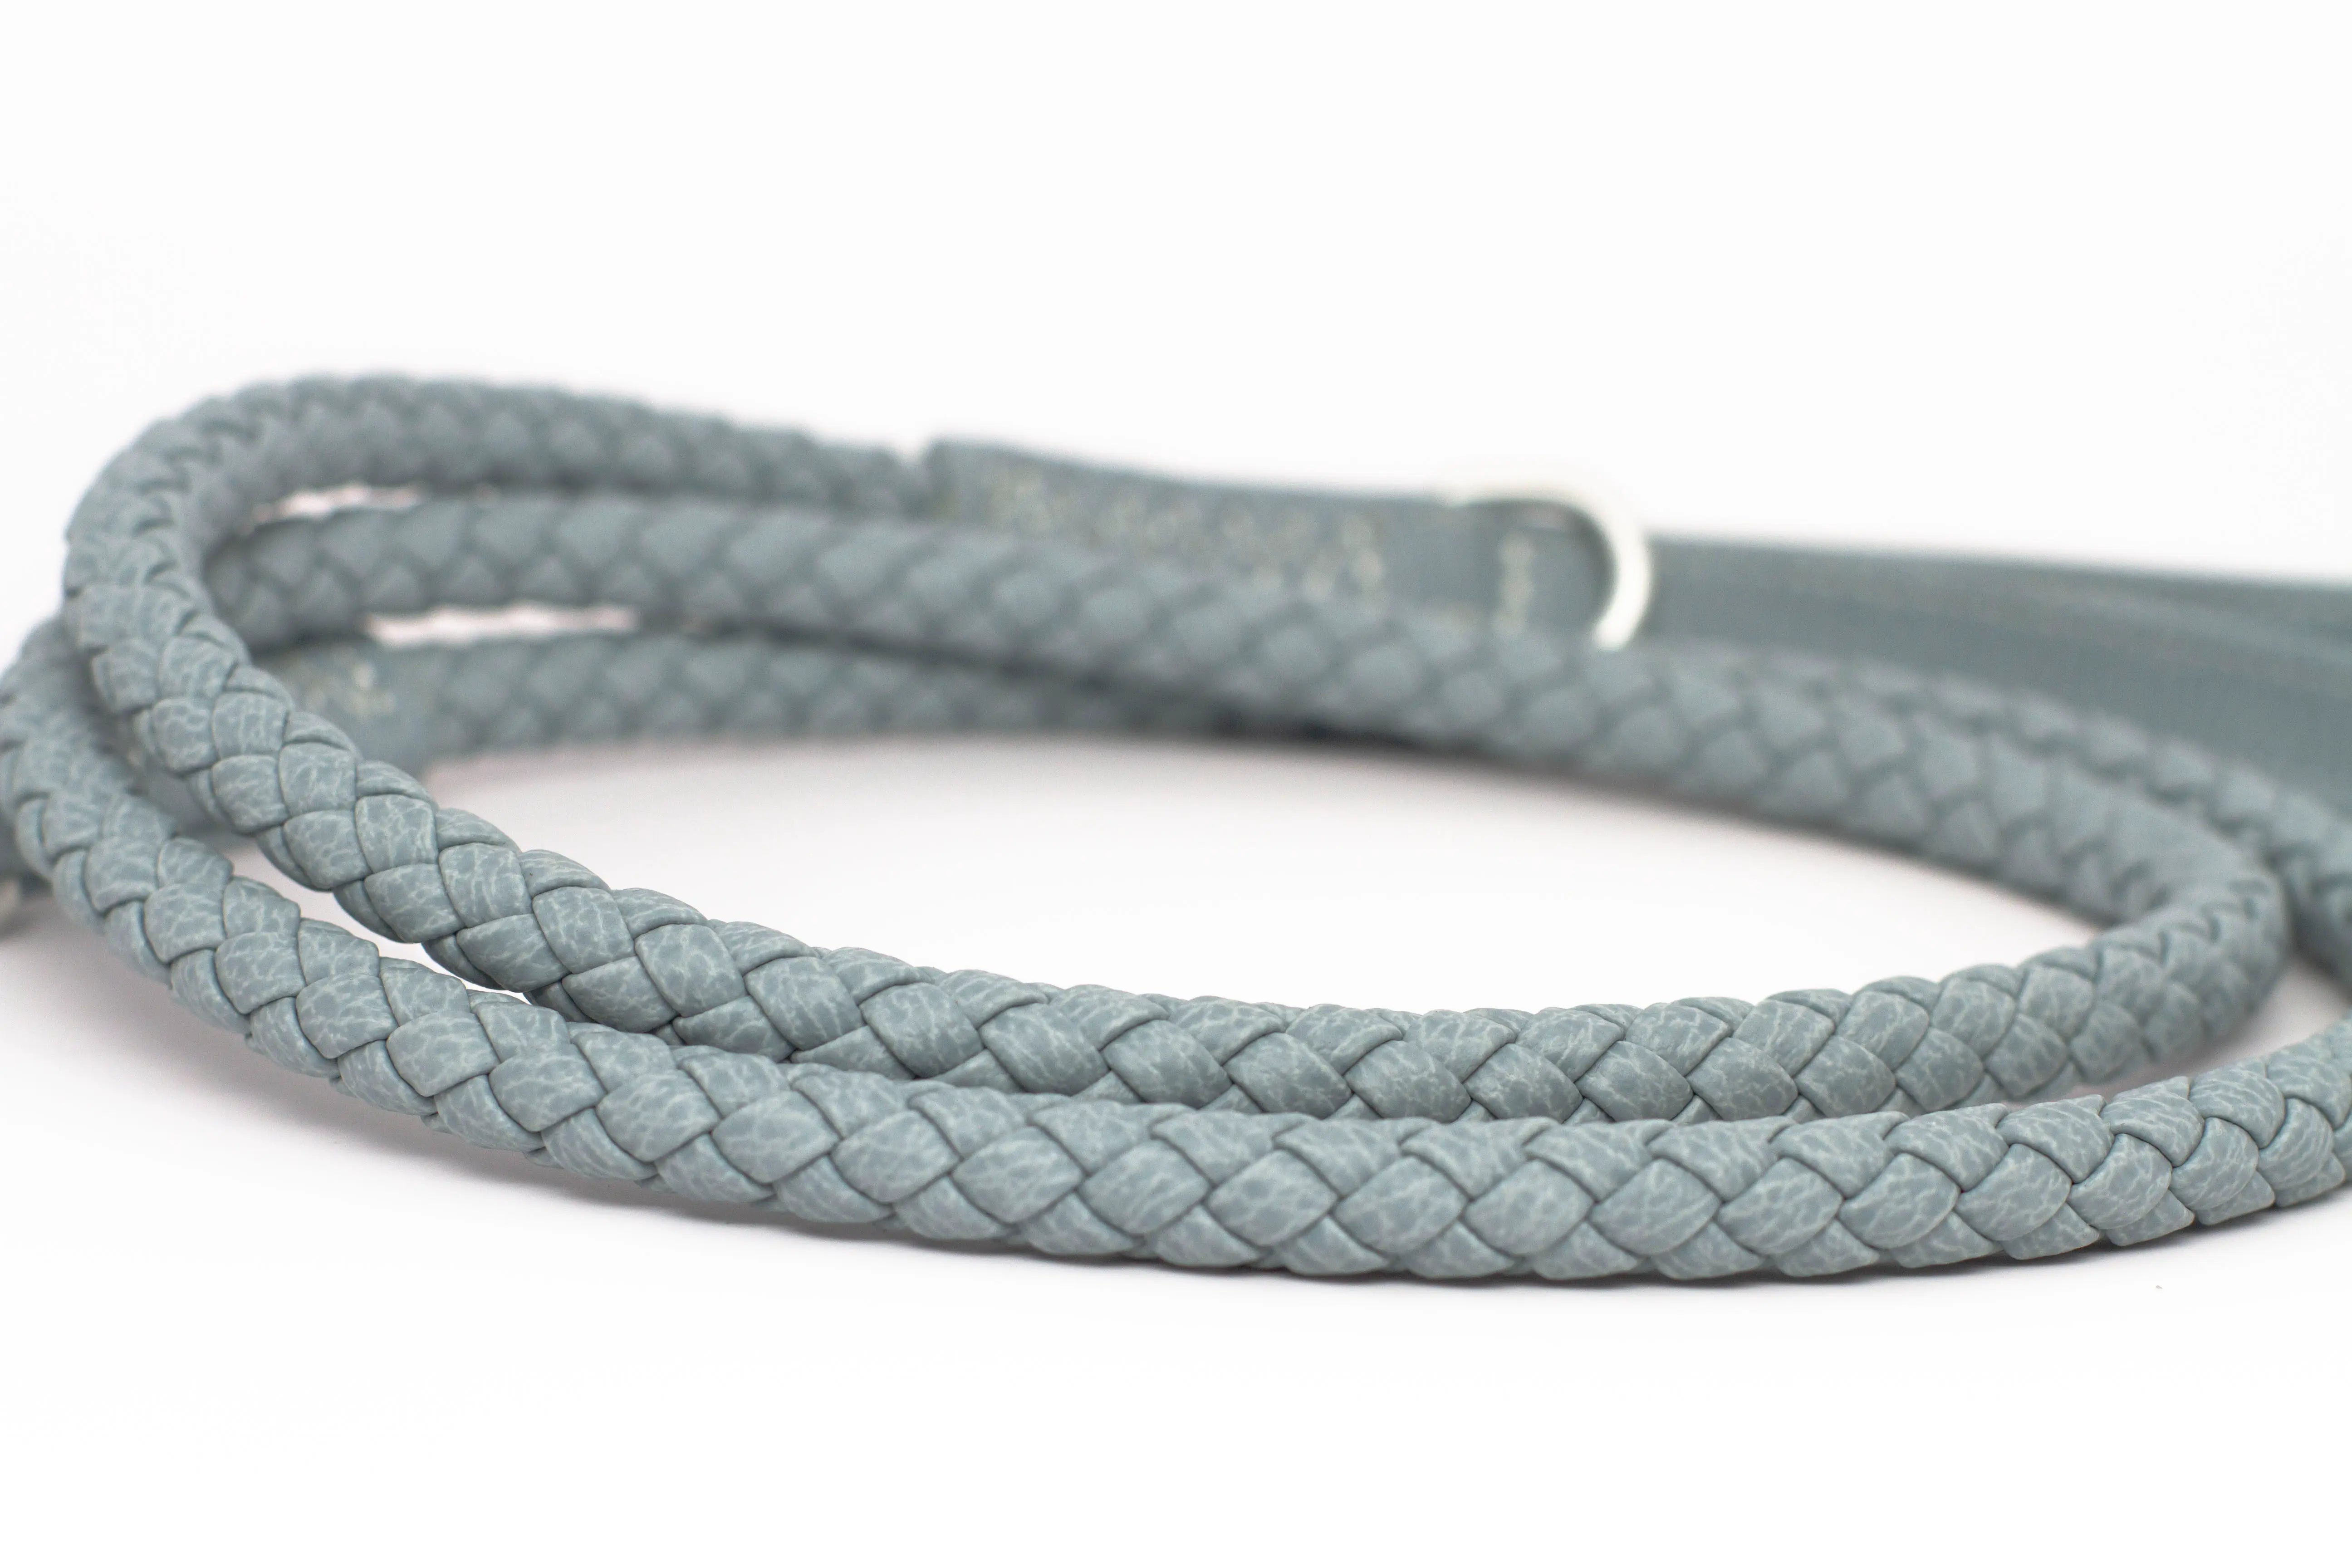 Close up of the braid of waterproof and durable dog leash with marine grade anodized aluminum hardware in the color London blue.